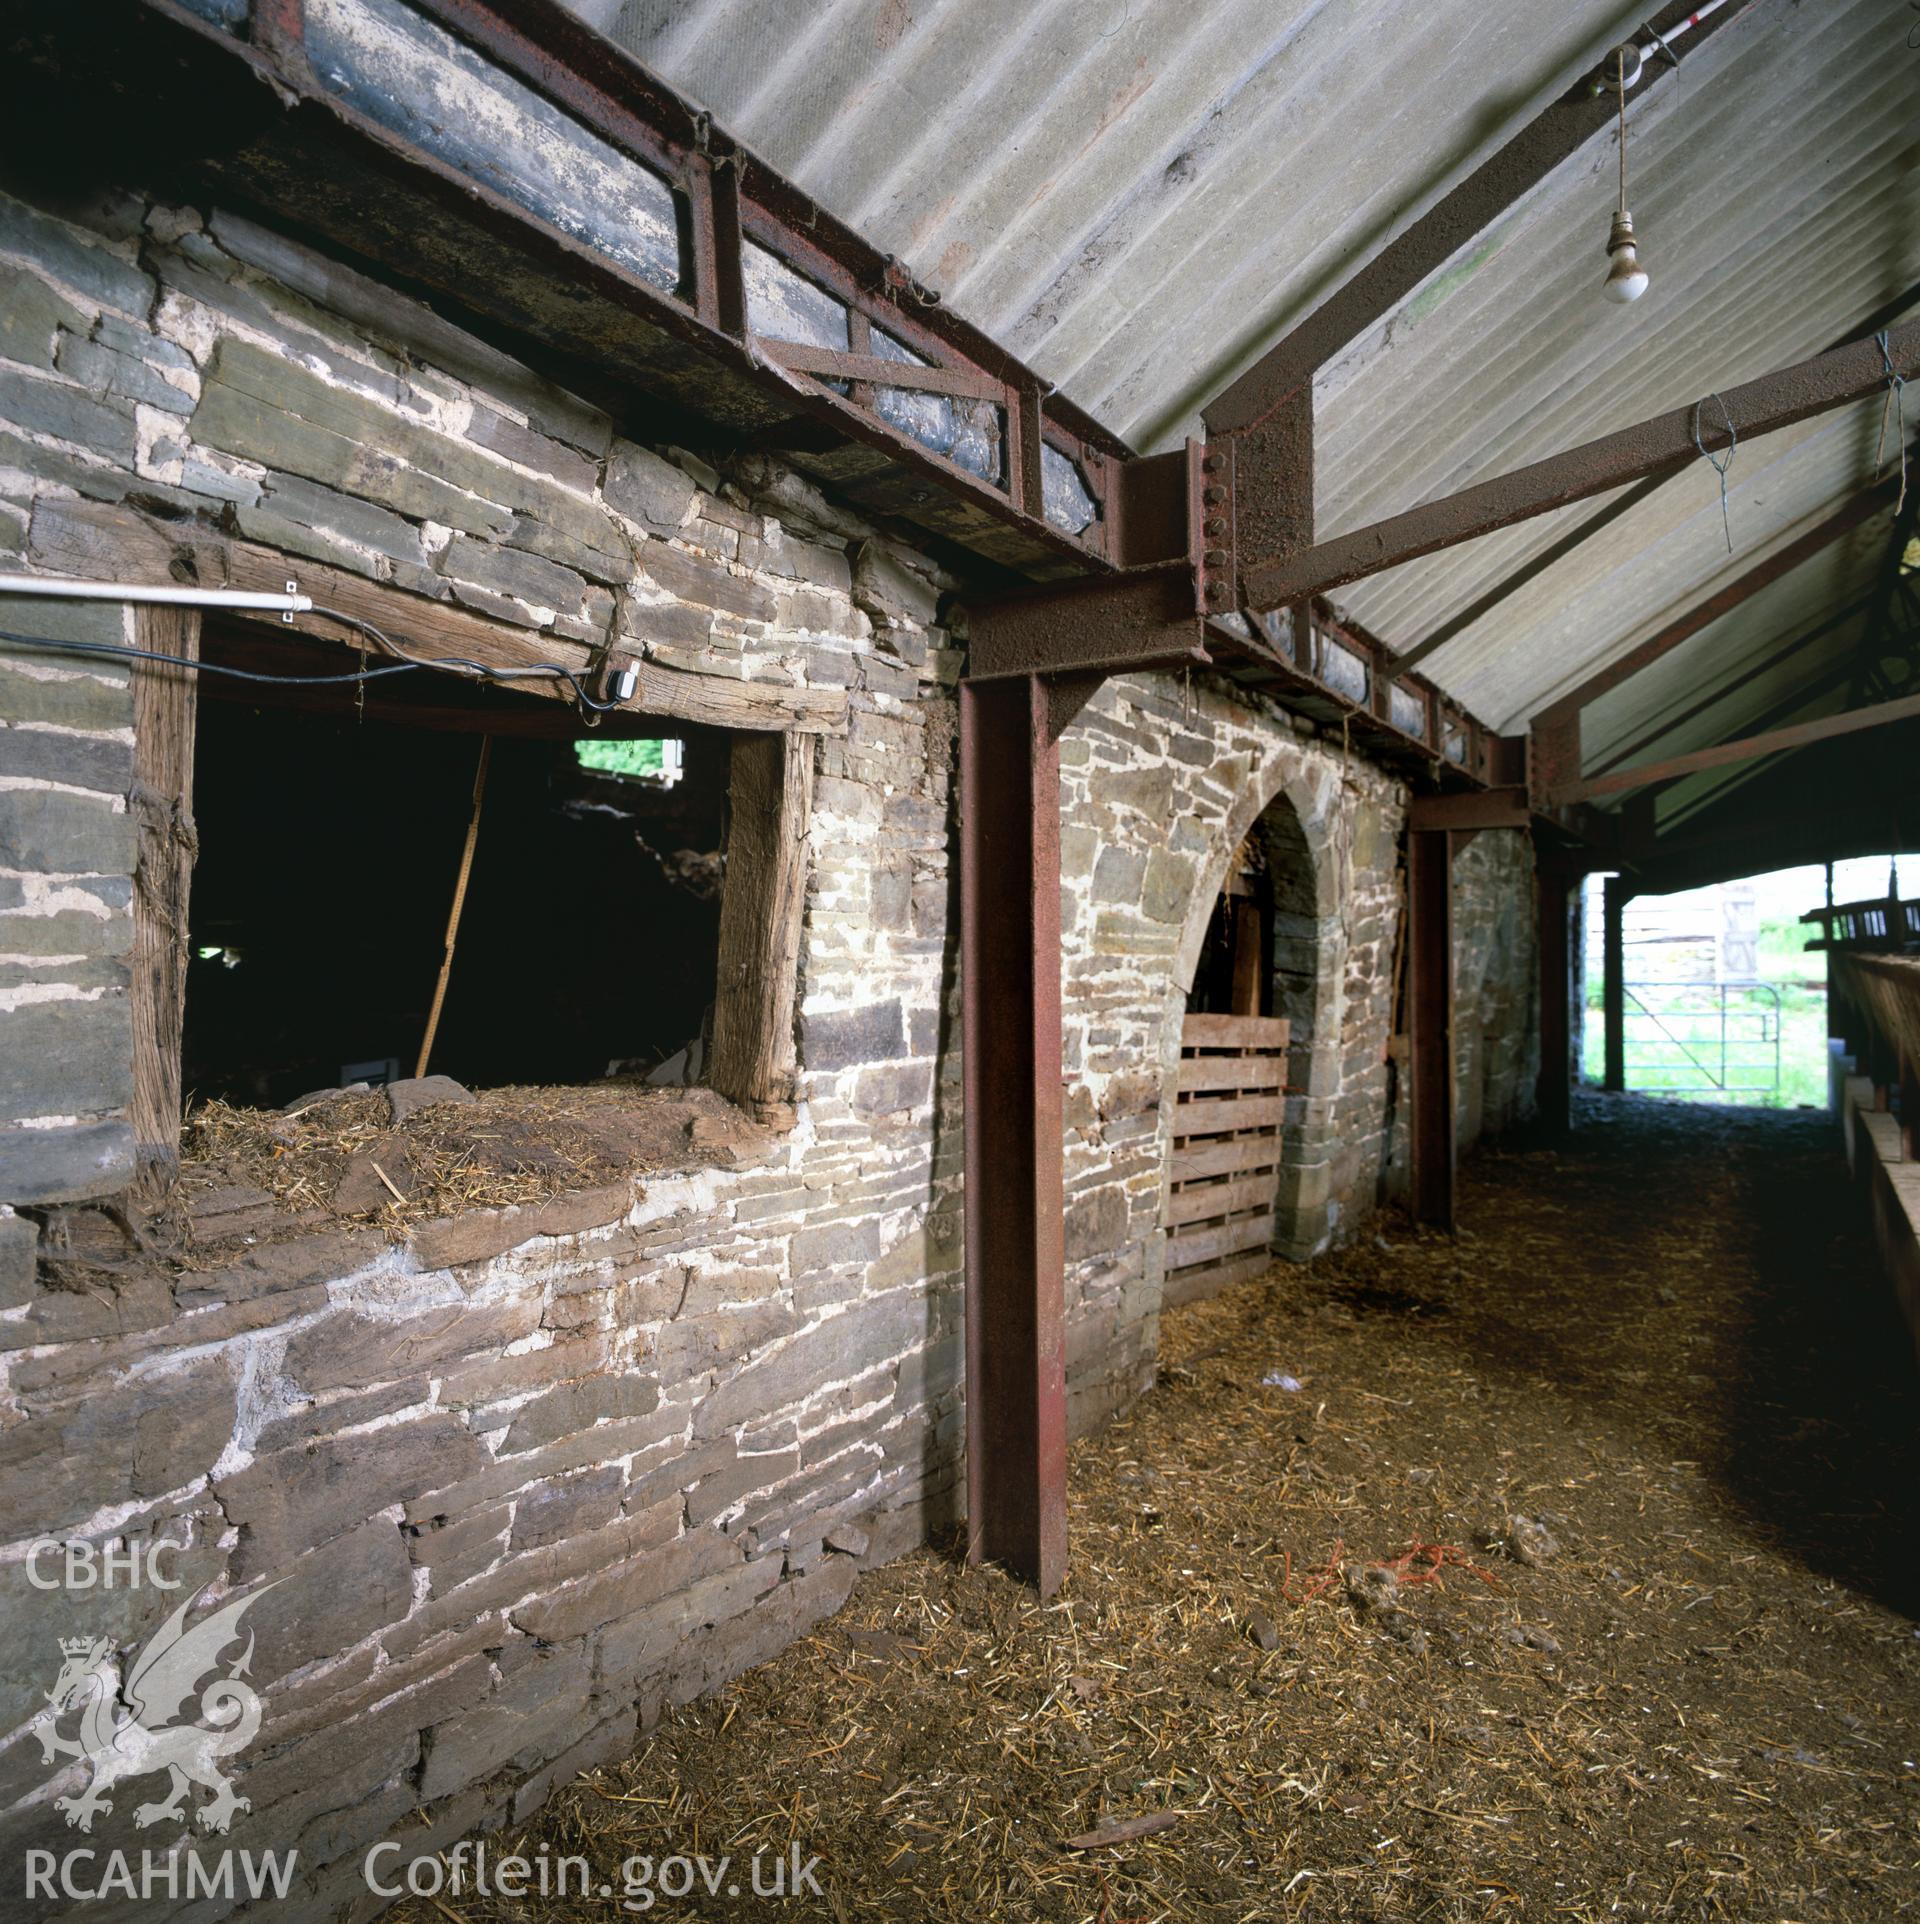 RCAHMW colour transparency showing the east elevation of the cowhouse at Clyro Court Farm, taken by Fleur James, August 2003